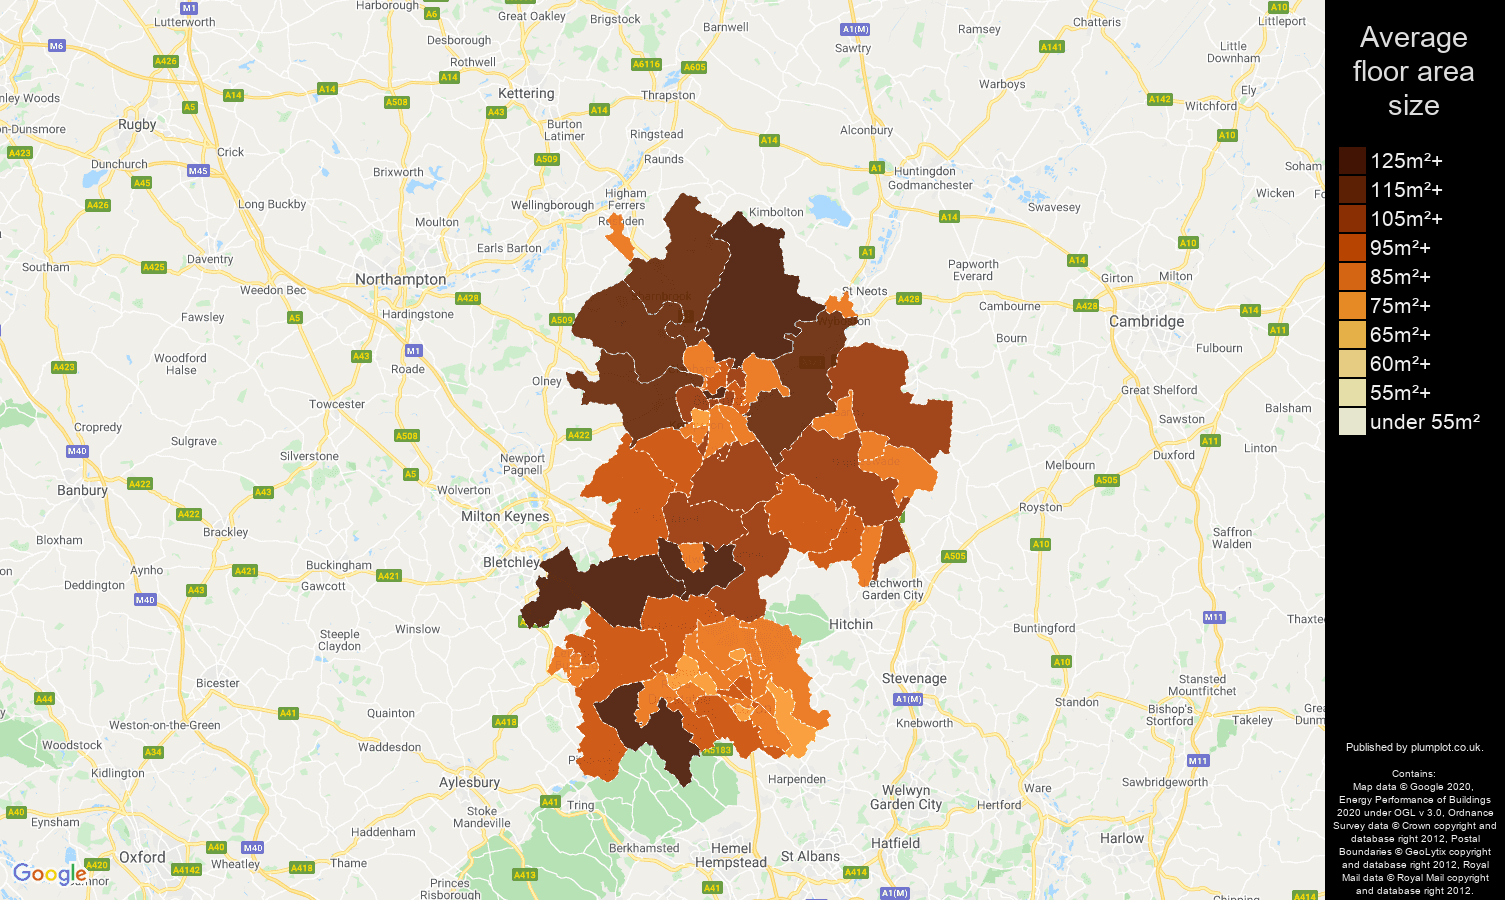 Bedfordshire map of average floor area size of houses